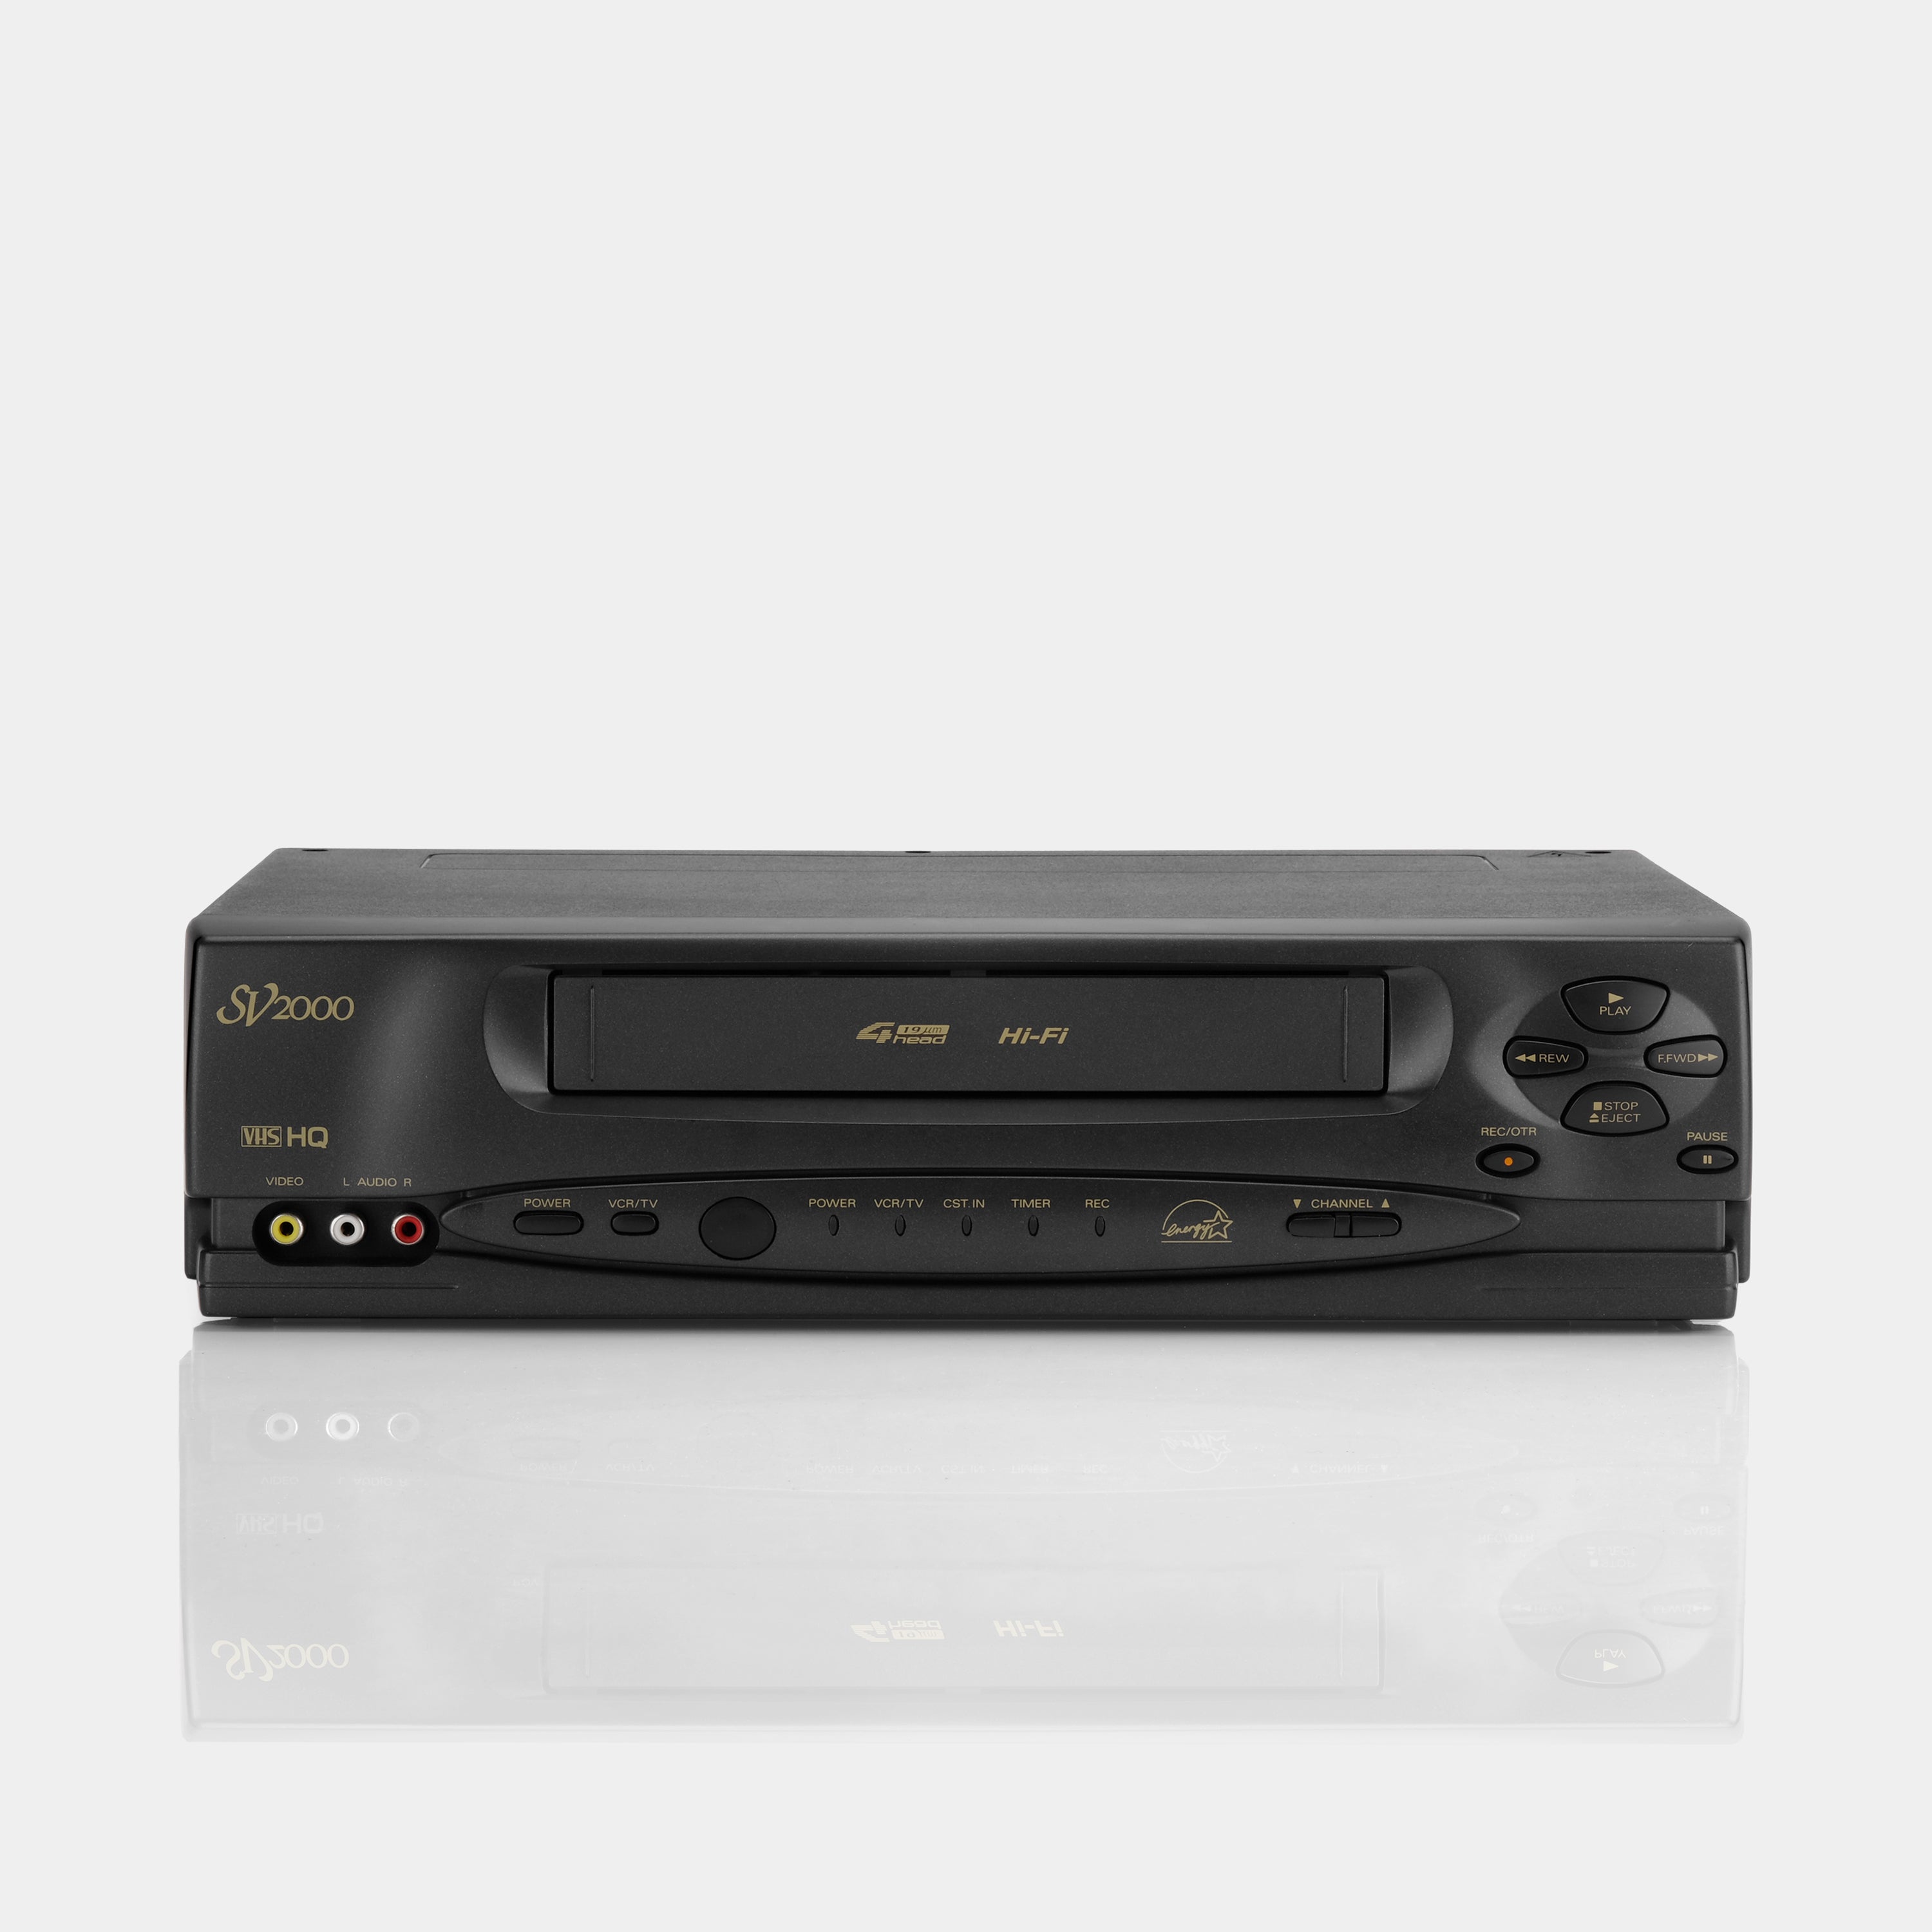 Philips SVA106AT22 VCR VHS Player